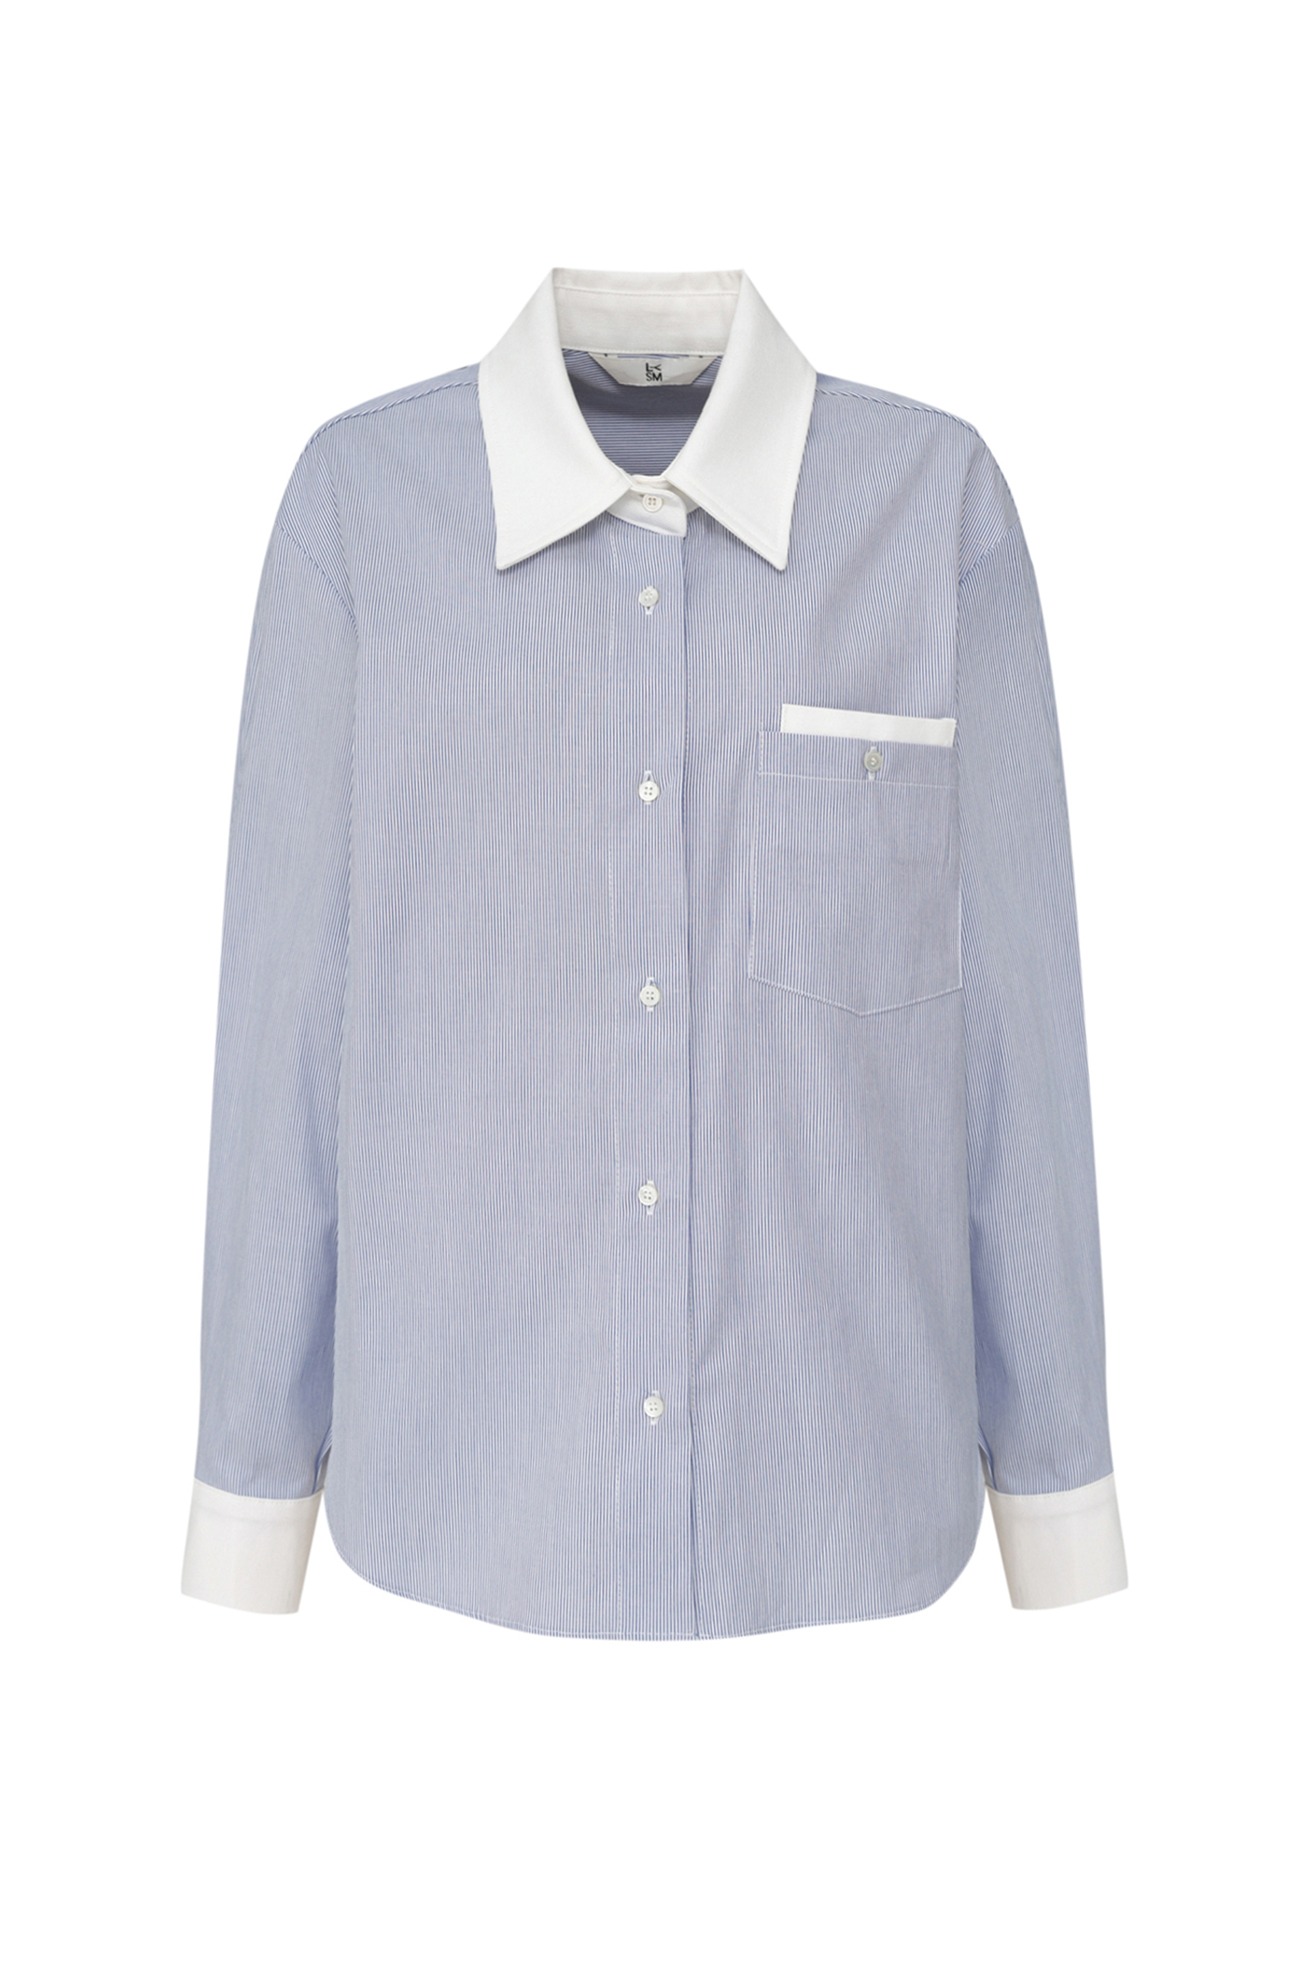 Stripe Shirt with Solid Cuff &amp; Collar 2/16 순차발송